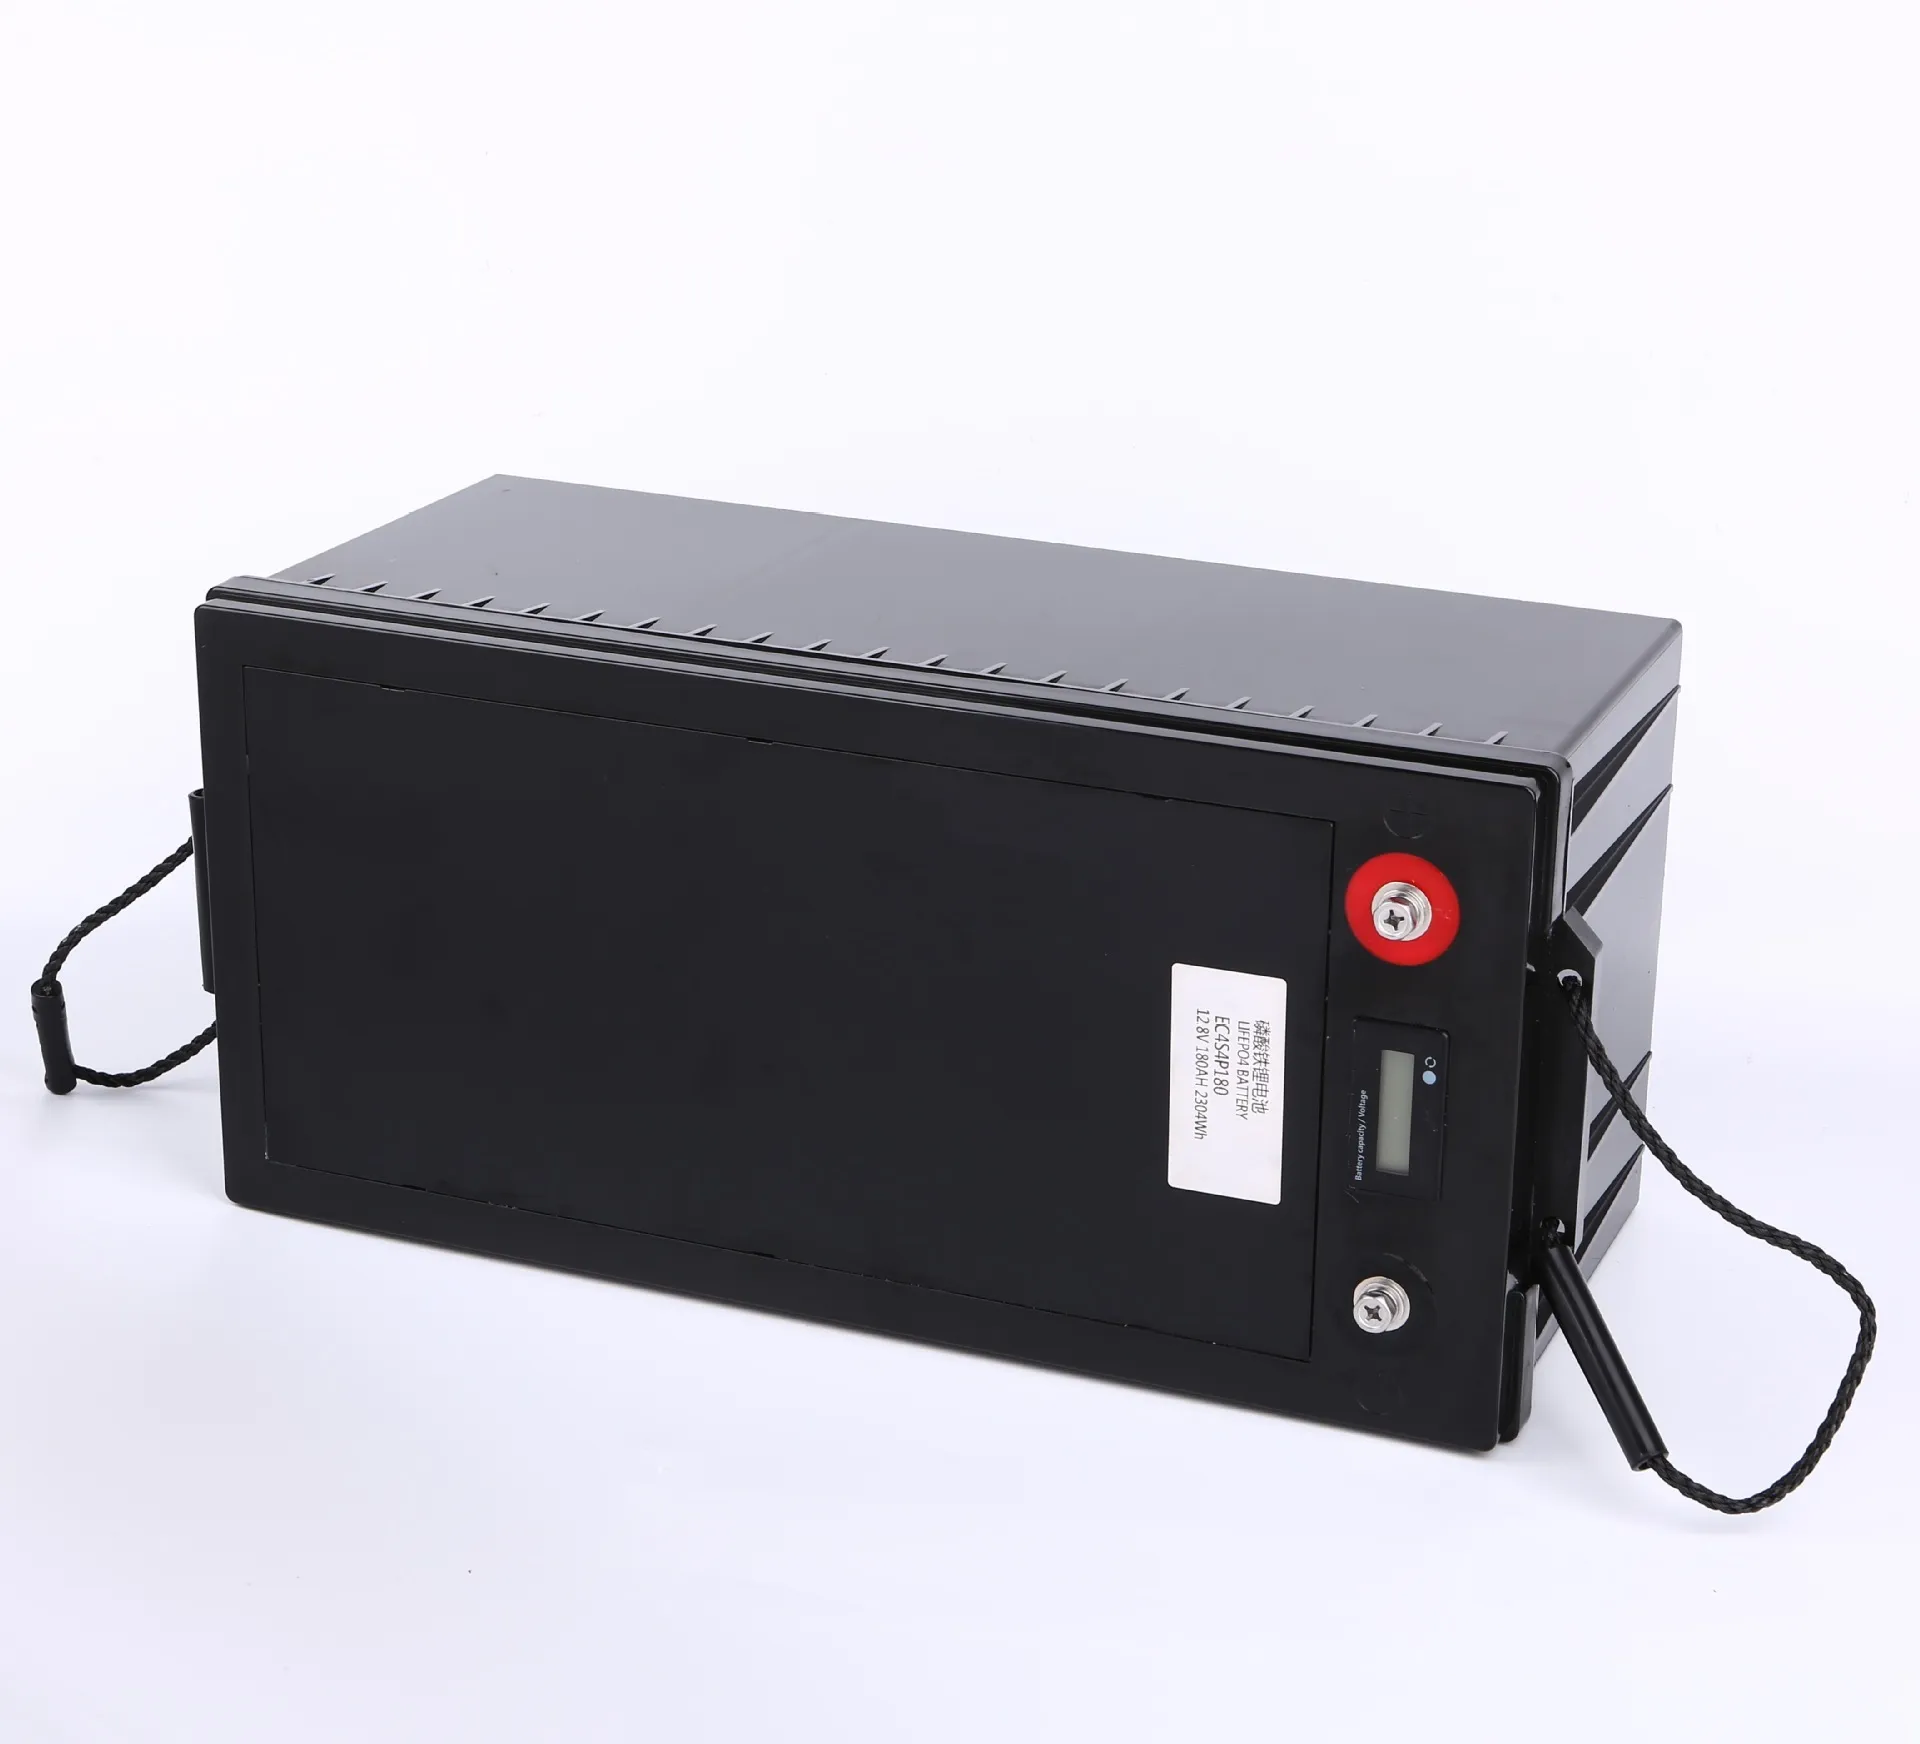 200Ah Smart BMS Bluetooth Deep Cycle Rechargeable LiFePO4 13s4p 48v Battery  For RV, Marine, And Solar Systems From Ecson1688, $650.17